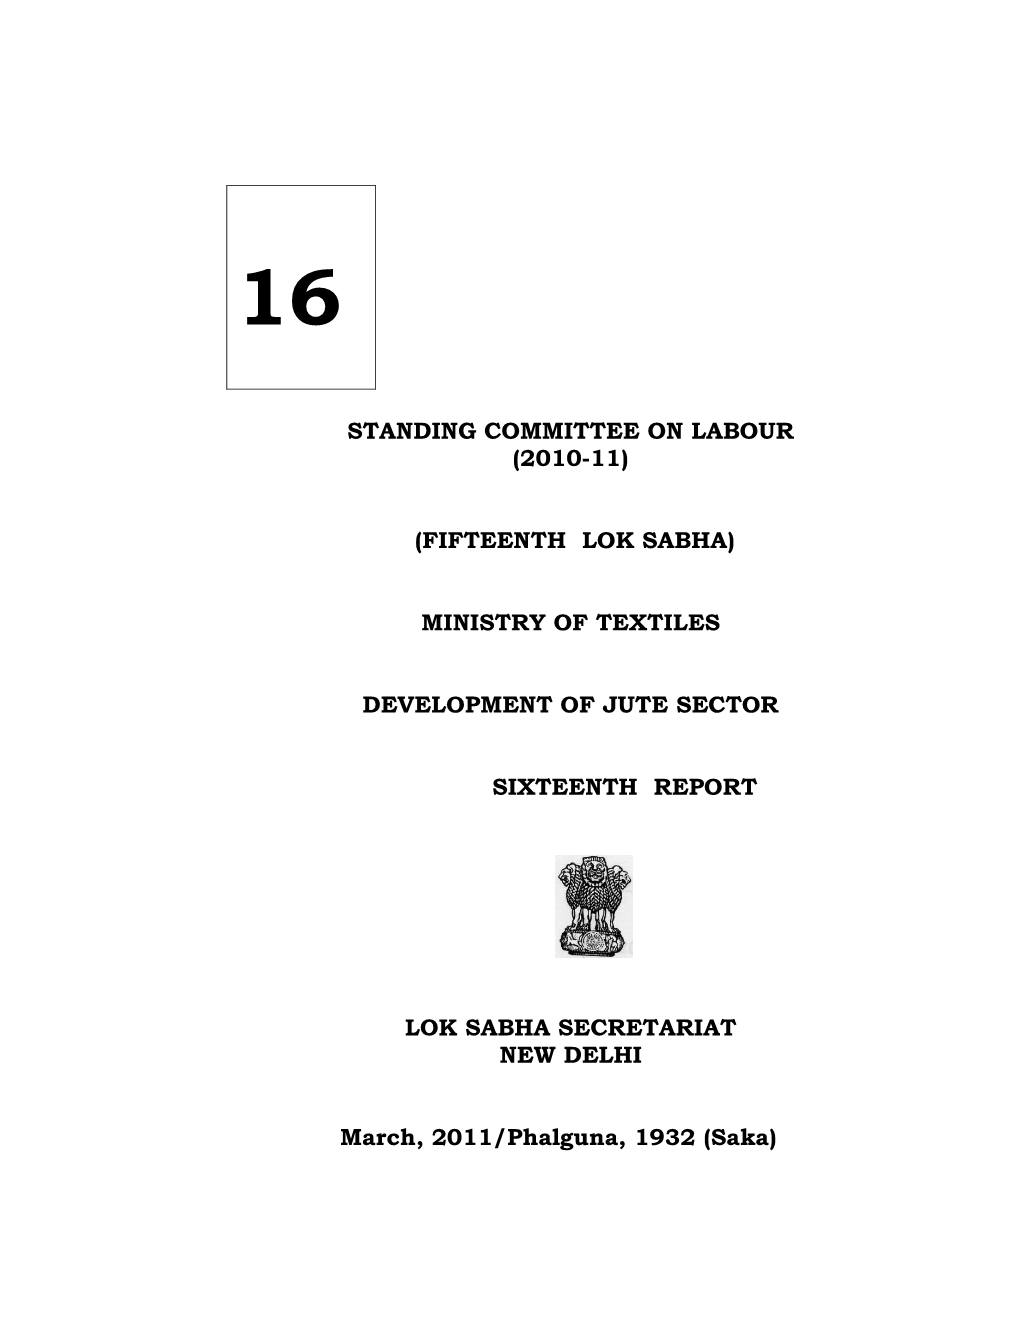 Standing Committee on Labour (2010-11) (Fifteenth